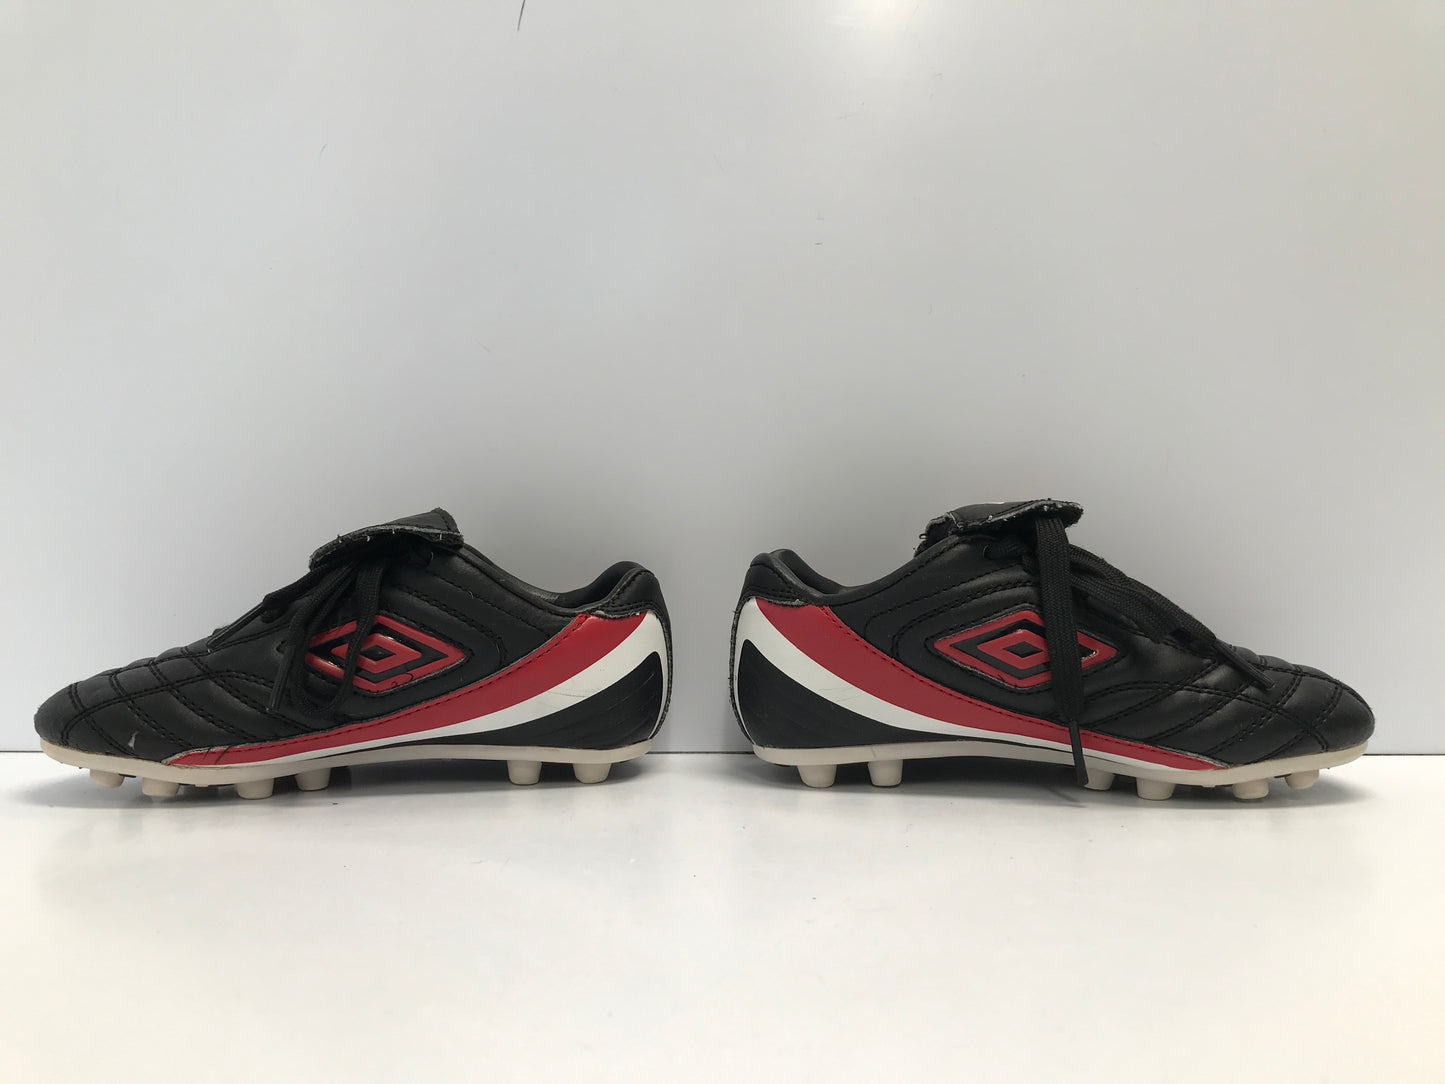 Soccer Shoes Cleats Child Size 11 Umbro Black Red Excellent